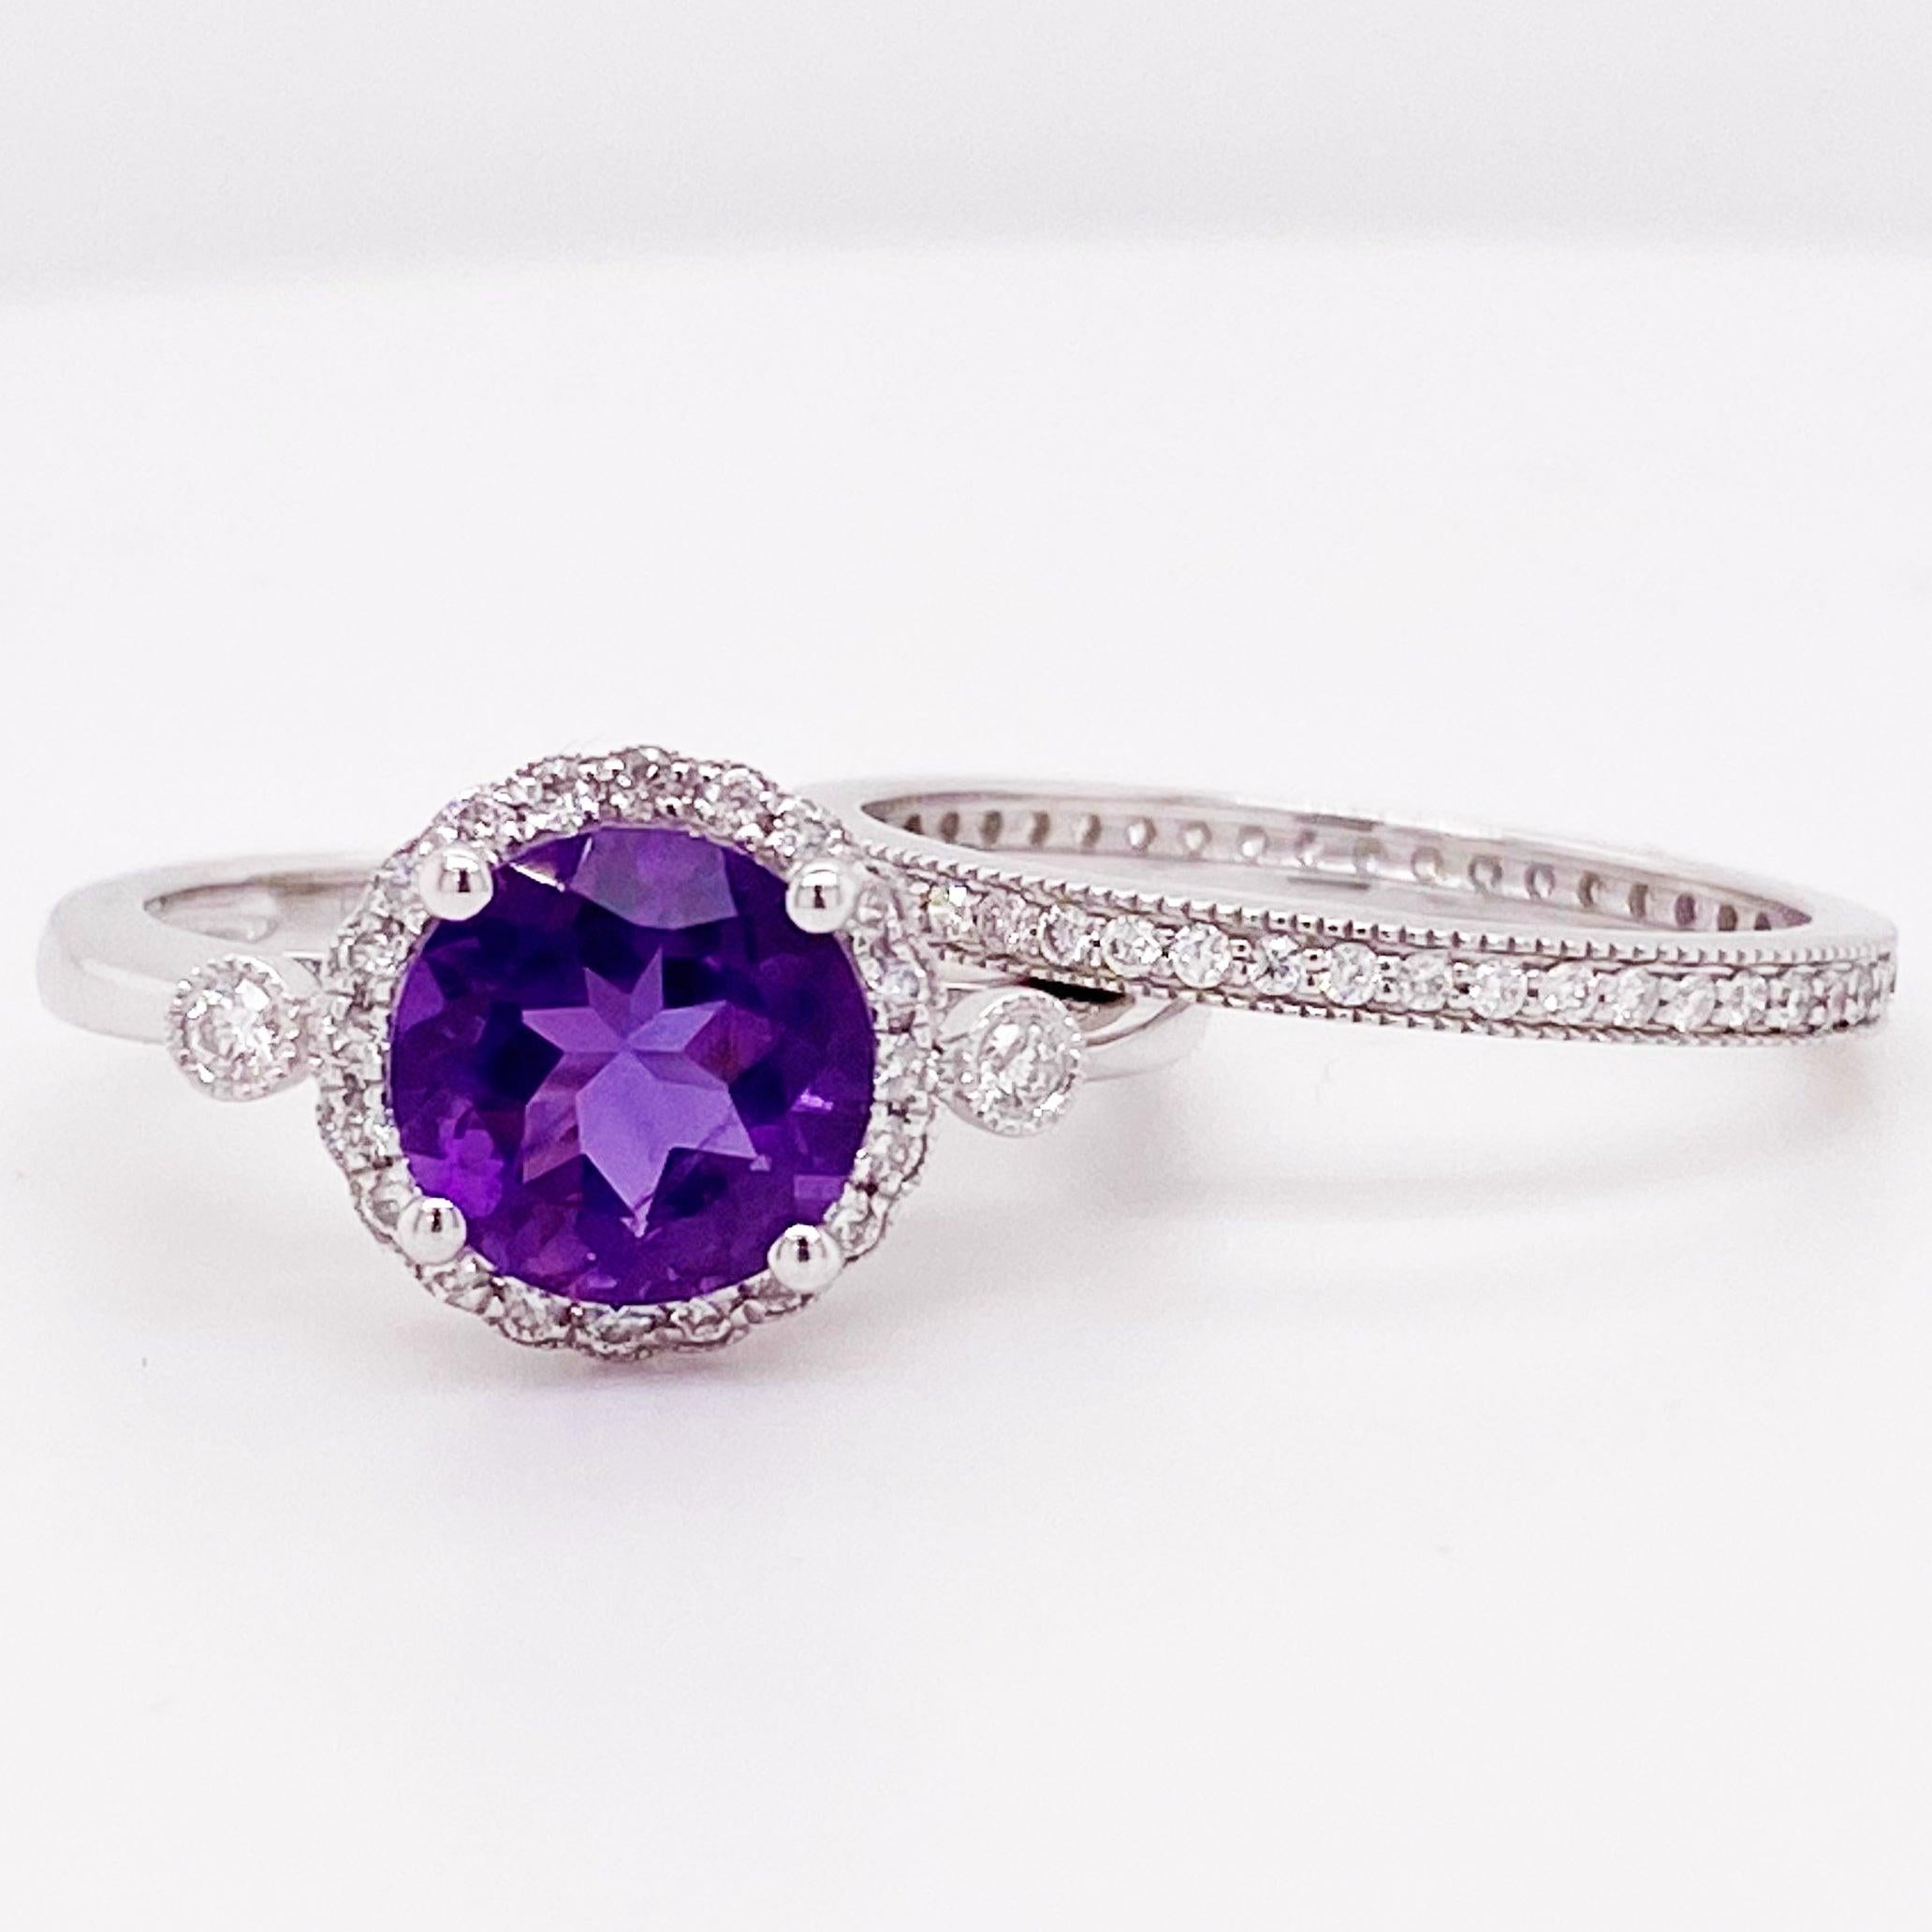 For Sale:  Amethyst Diamond Ring, Halo, Round, Engagement Ring Purple, 2.00 Carat Total Wt 3